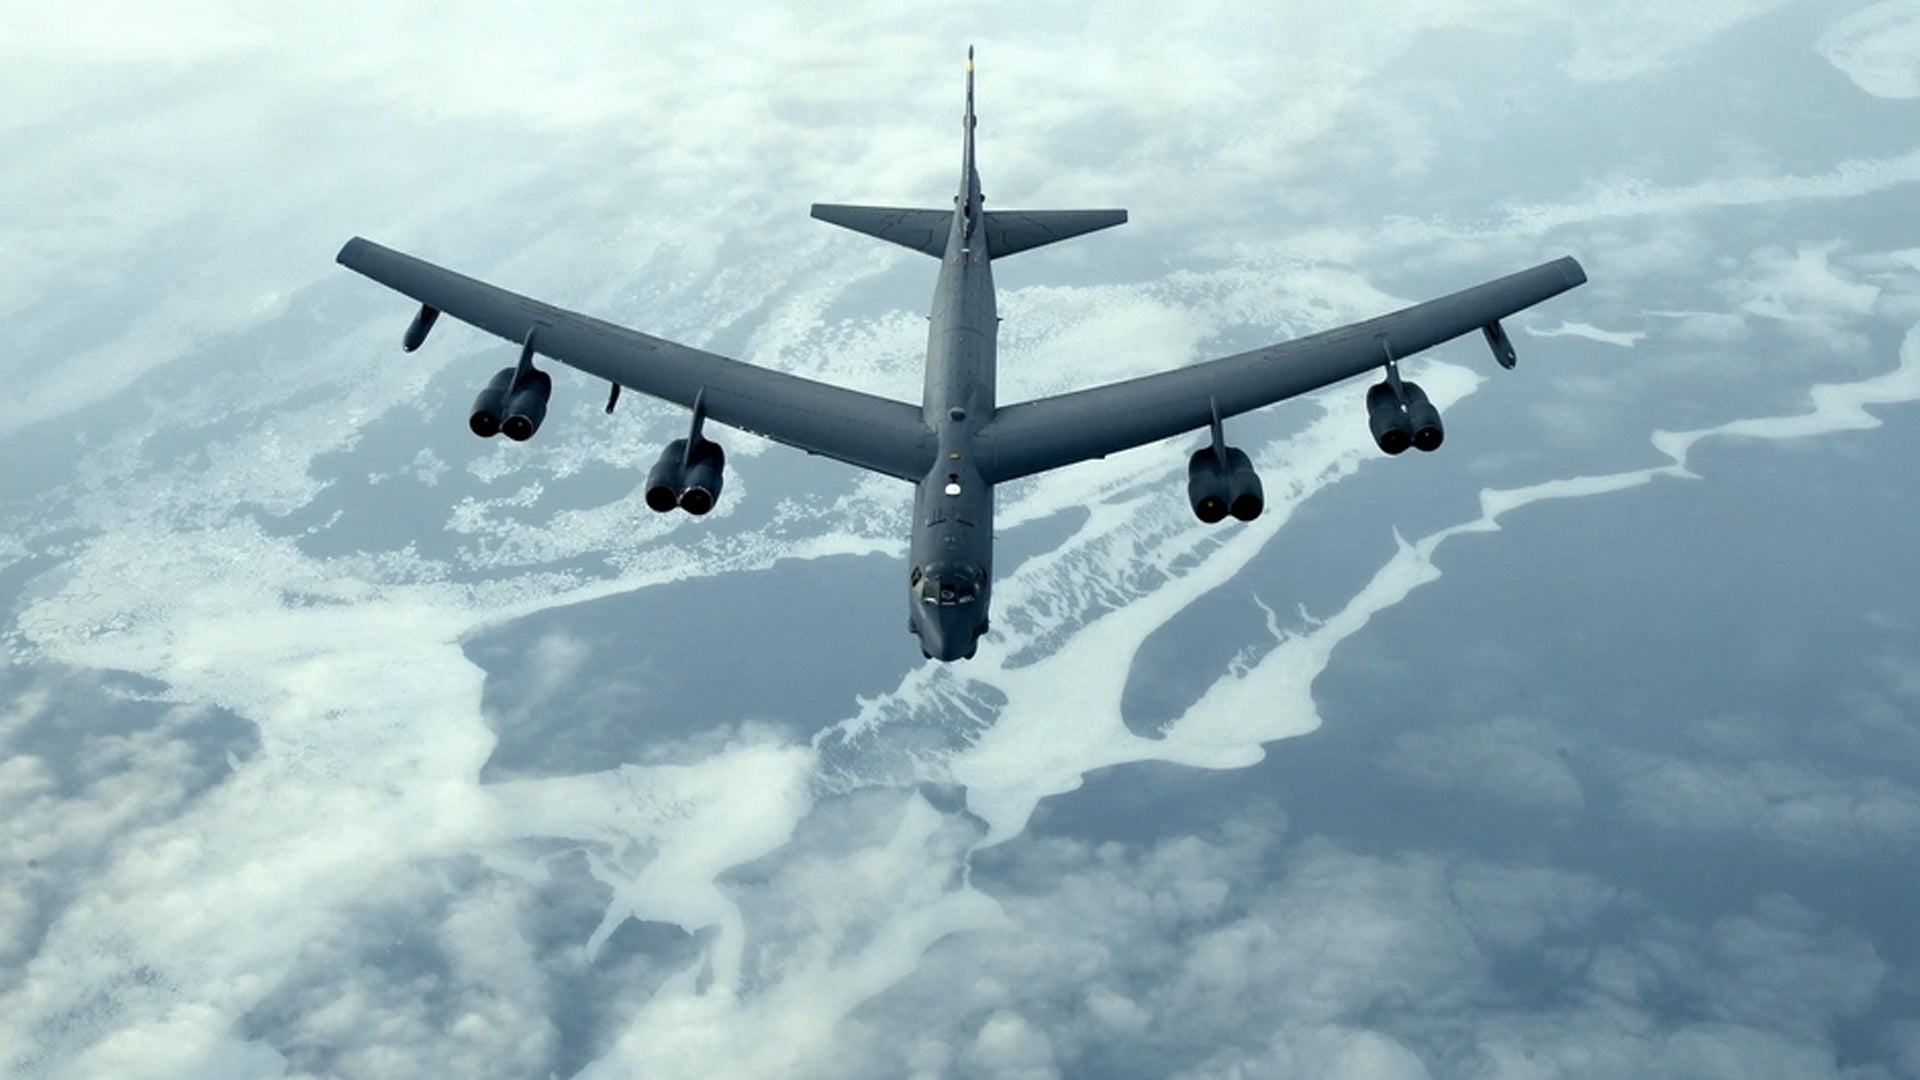 A U.S. Air Force B-52H Stratofortress assigned to the 5th Bomb Wing at Minot Air Force Base, North Dakota, flies alongside a KC-10 Extender assigned to the 305th Air Mobility Wing, Joint Base McGuire-Dix-Lakehurst, N.J., after receiving fuel, Jan. 6, 2021. (Staff Sgt. Stephanie Serrano/U.S. Air Force)